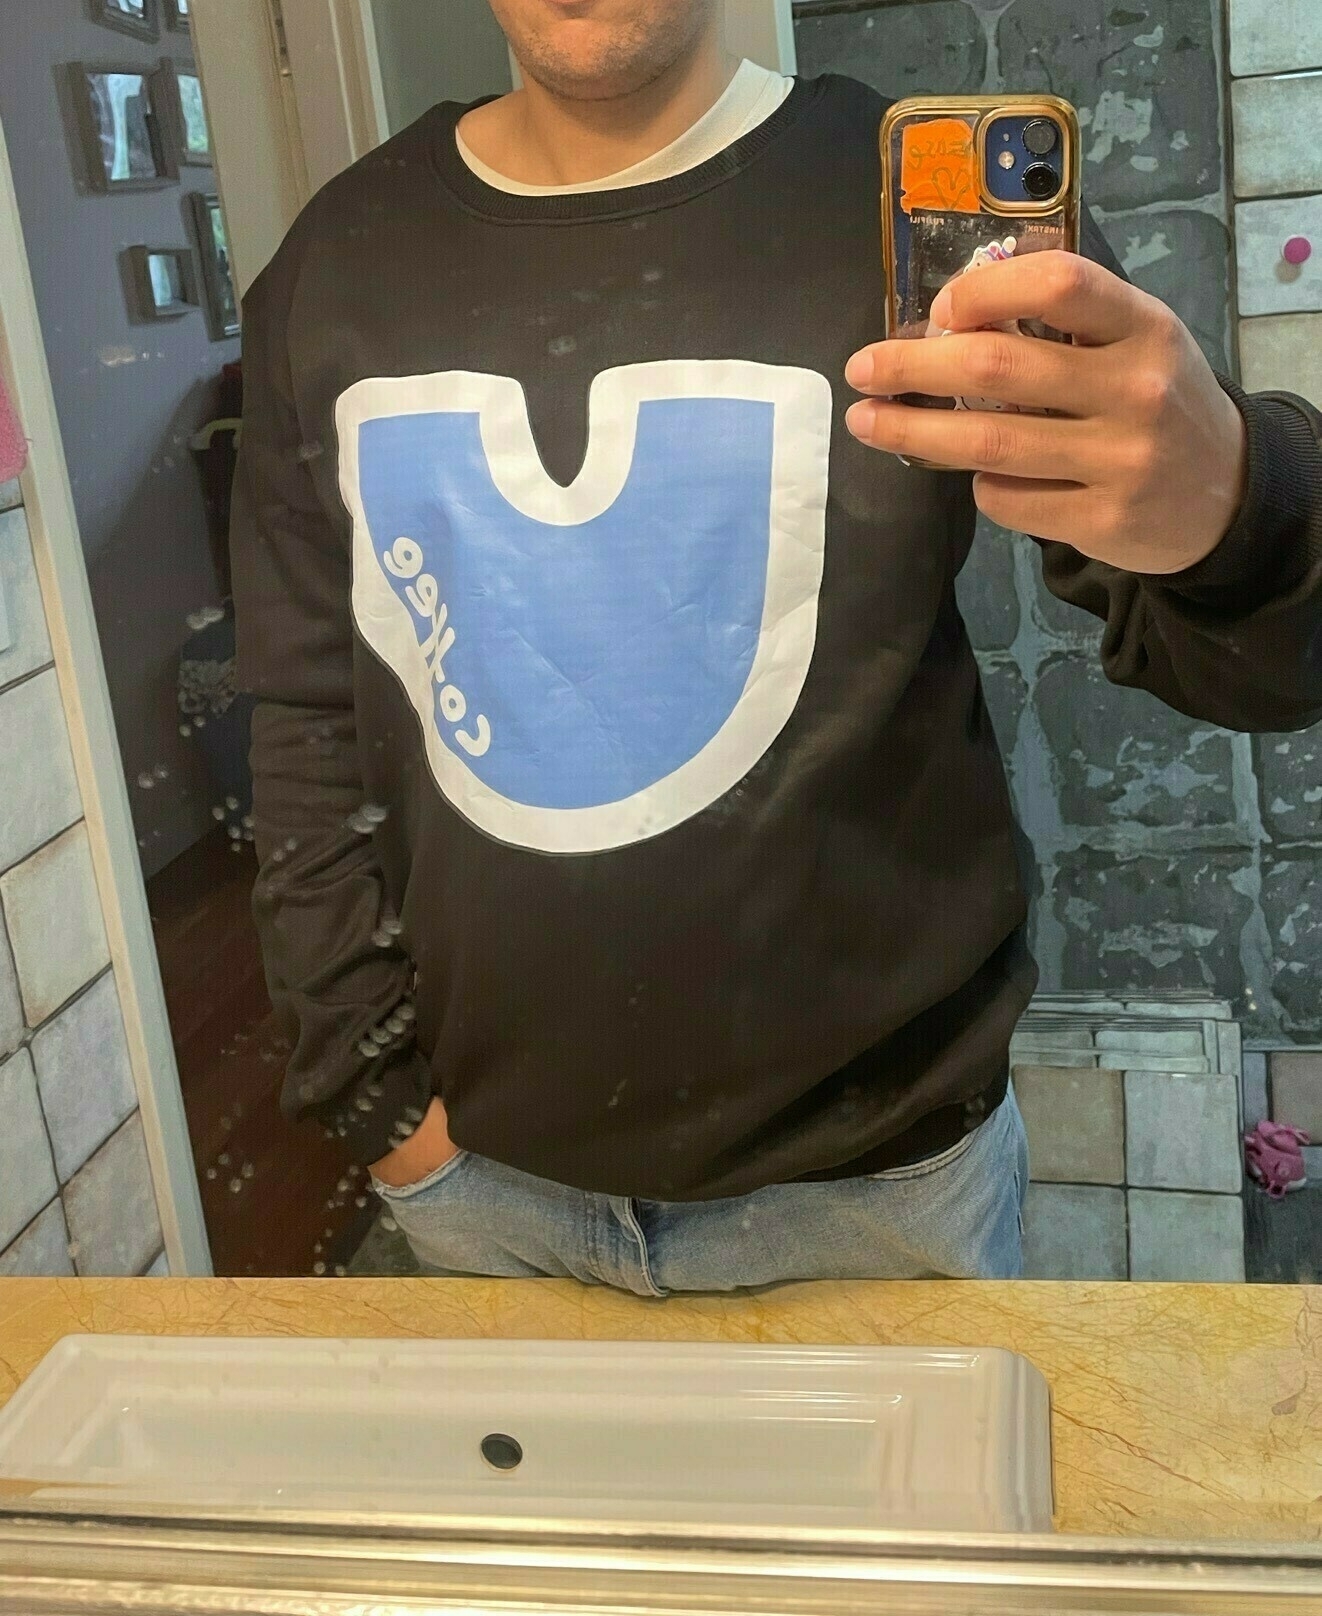 man wearing a jumper that has a giant U on it with the word coffee inside